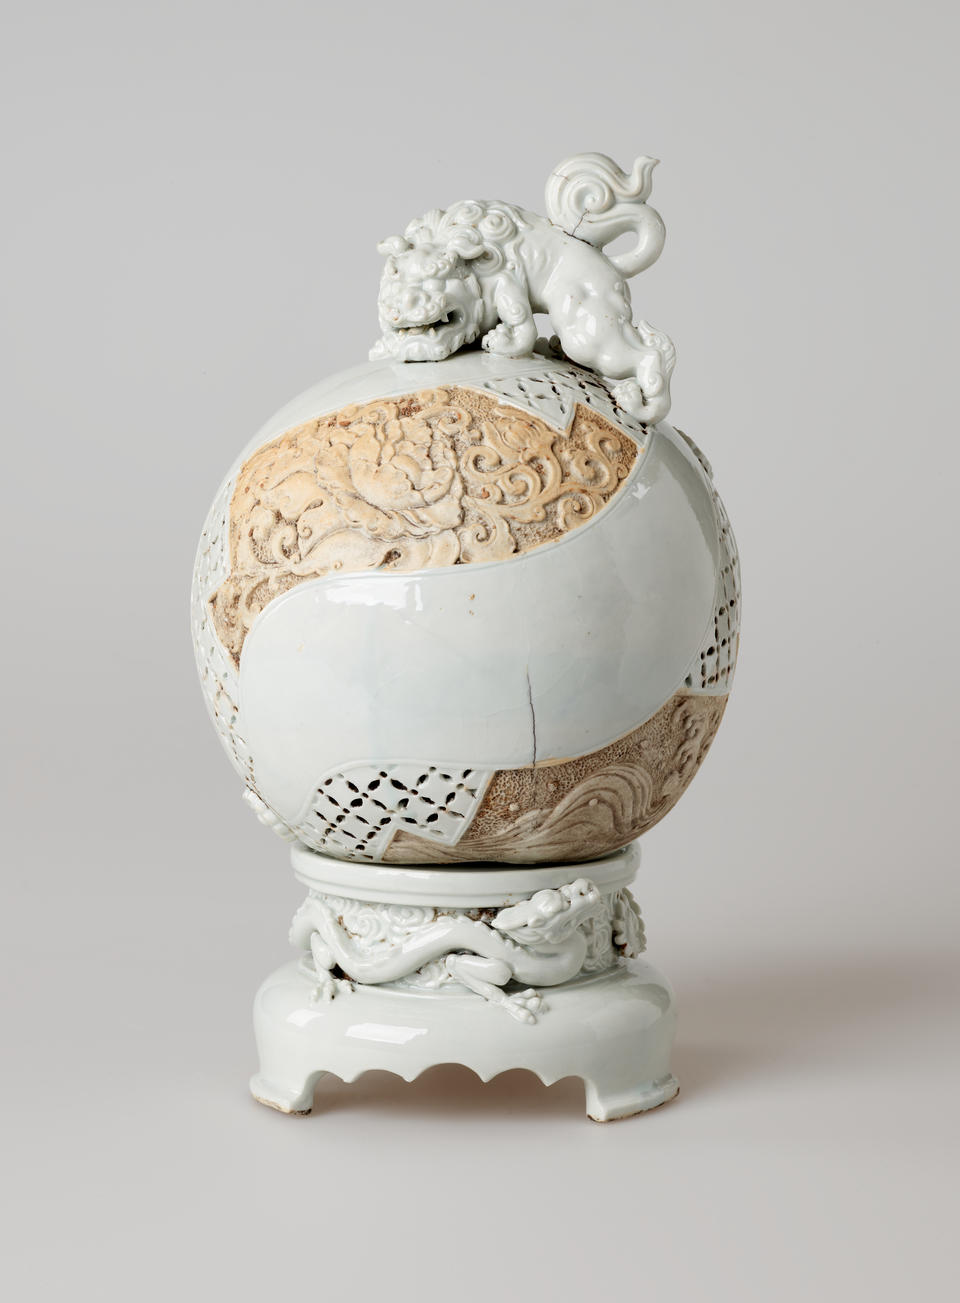 Light-colored sculptural globe with tan sections of ornate carving. An animal figure sits on top of the sphere. The base has a scalloped front edge and image of a dragon.